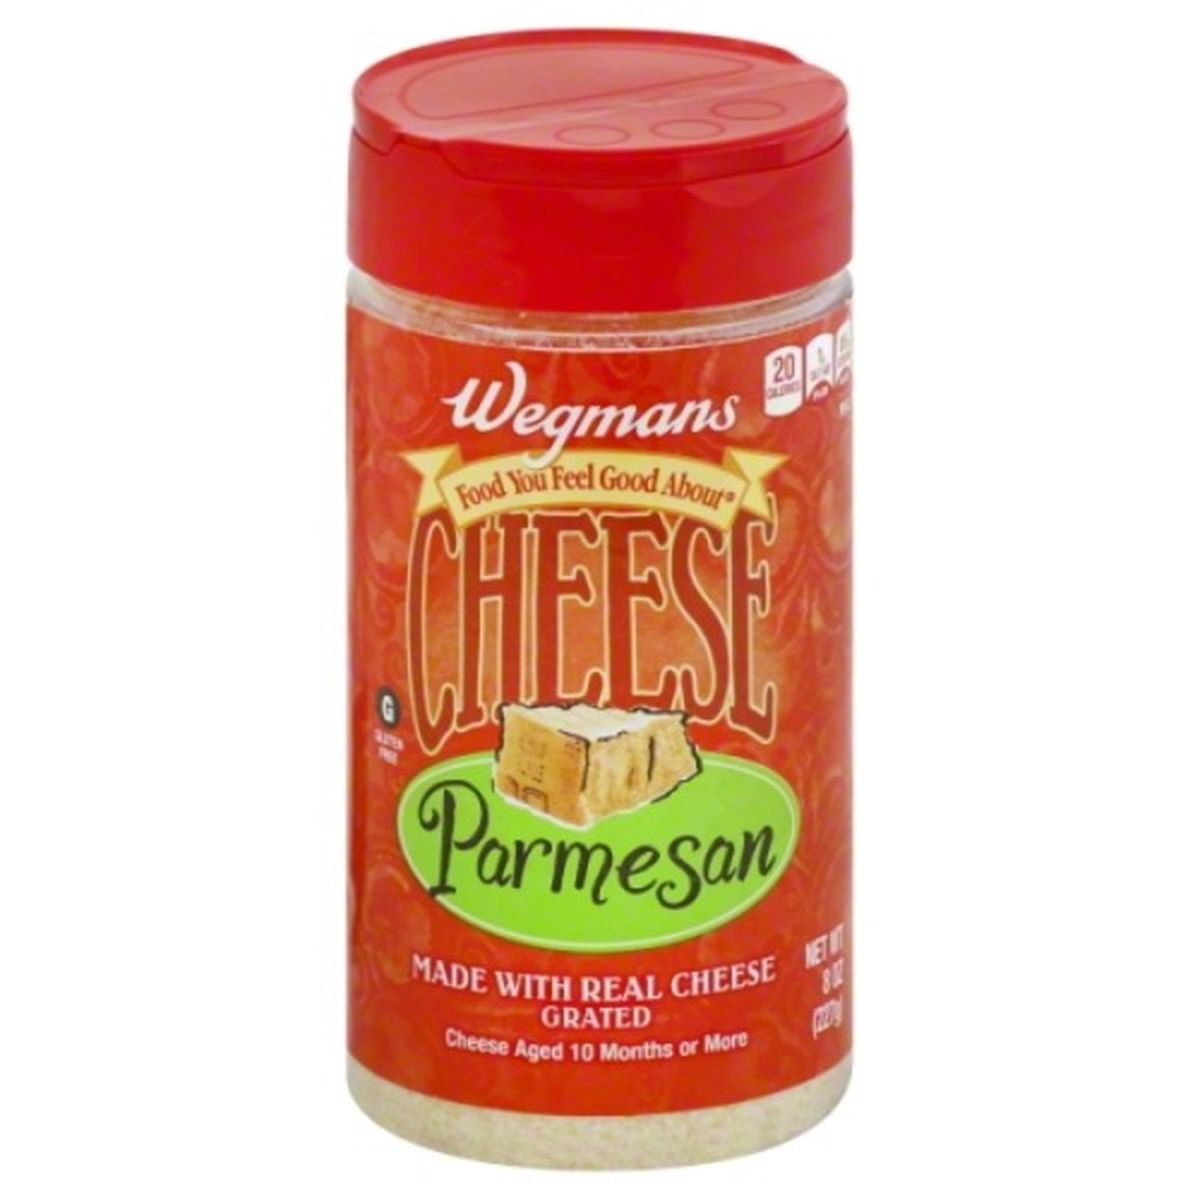 Calories in Wegmans Parmesan Grated Cheese